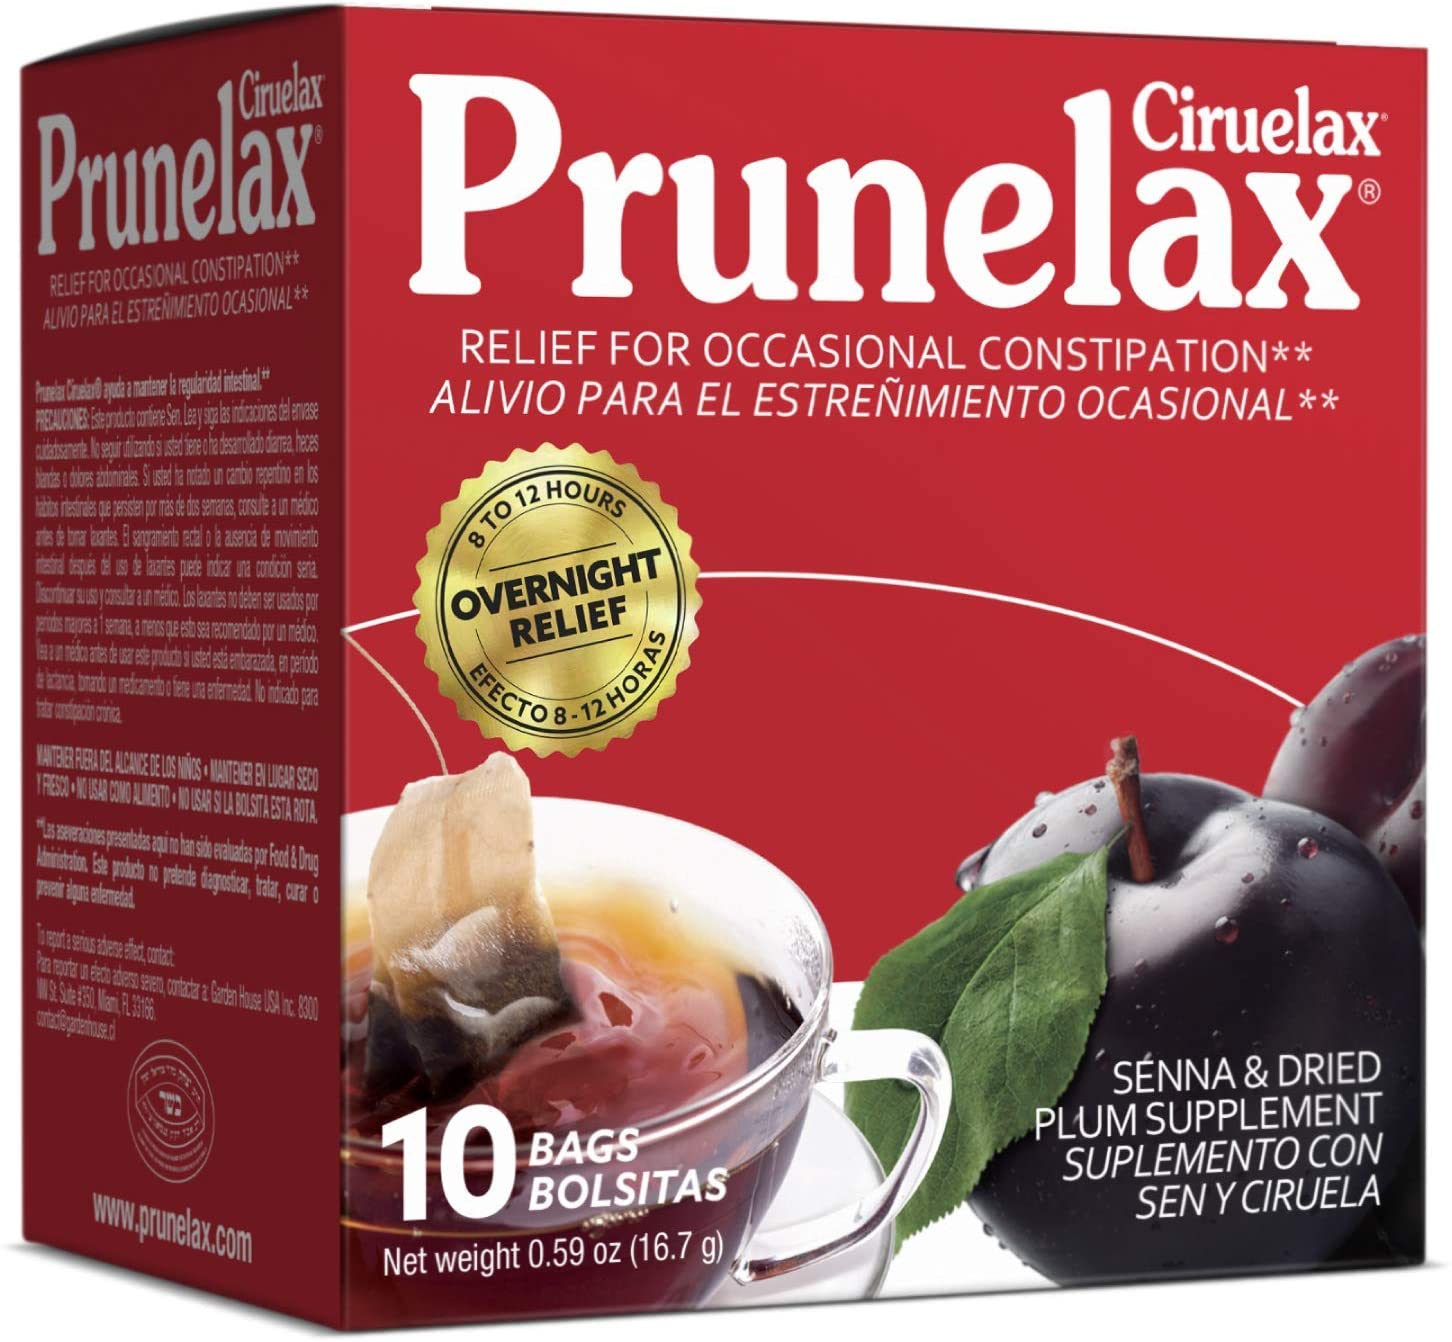 Prunelax Ciruelax Natural Laxative Regular for Occasional Constipation